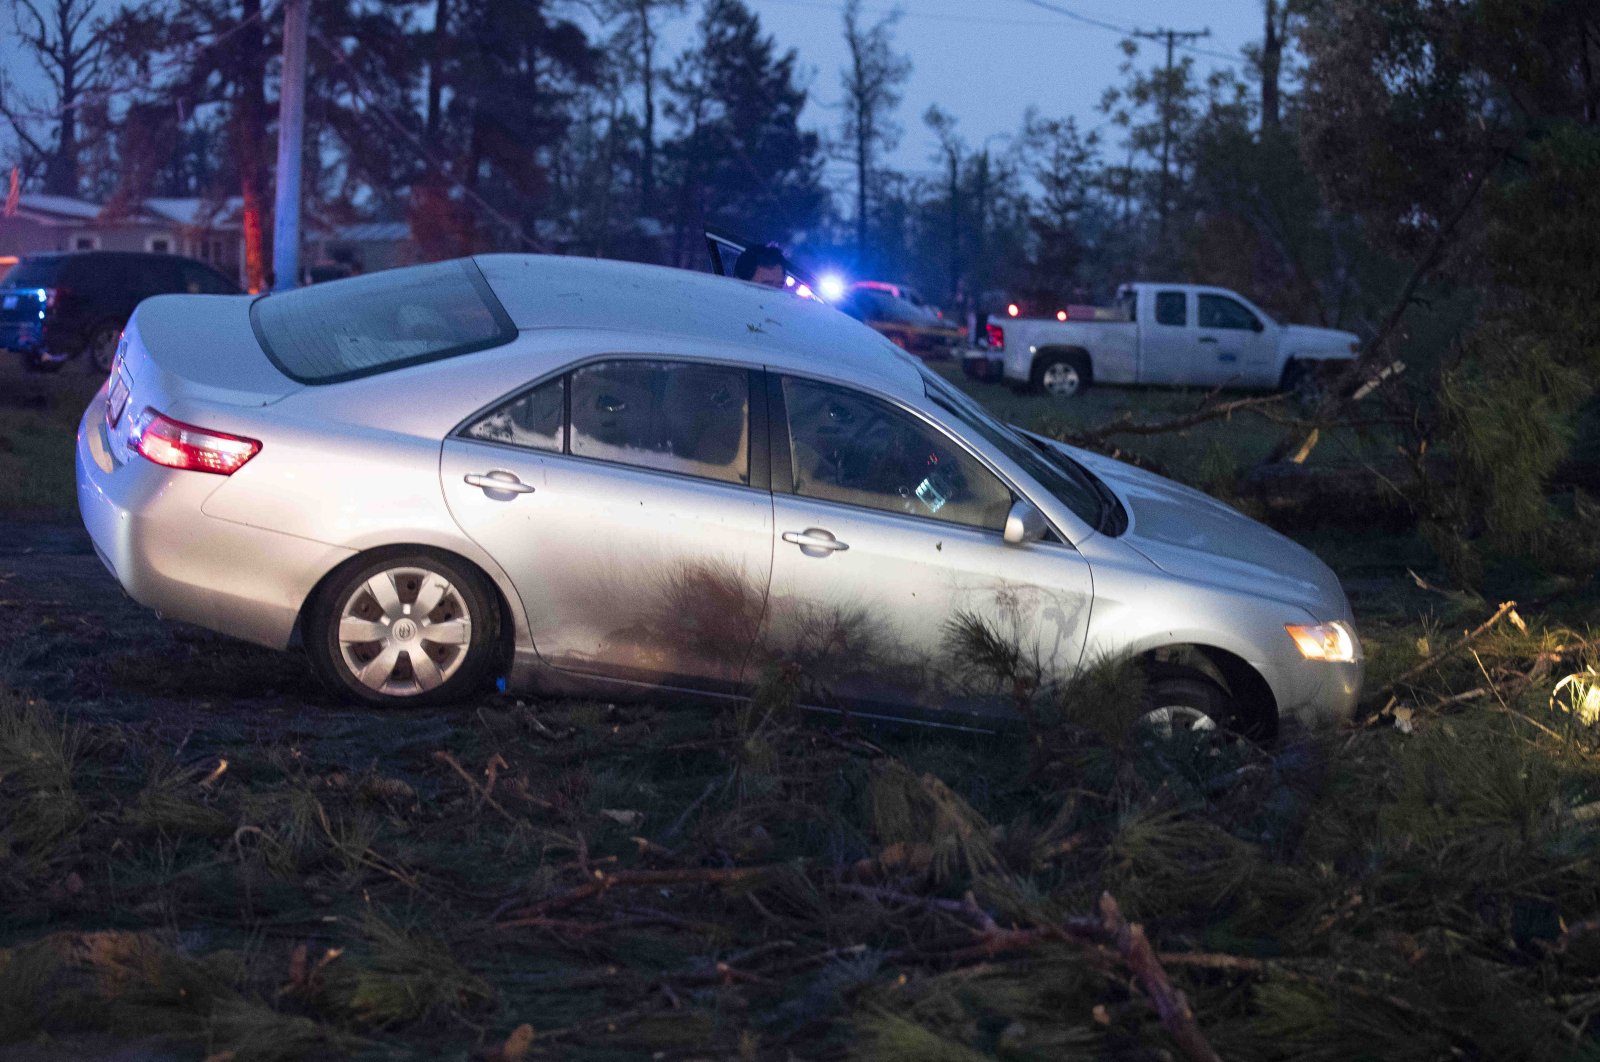 A car is seen in a ditch in Onalaska, Texas, after a tornado touched down in the area Wednesday, April 22, 2020. (AP Photo)